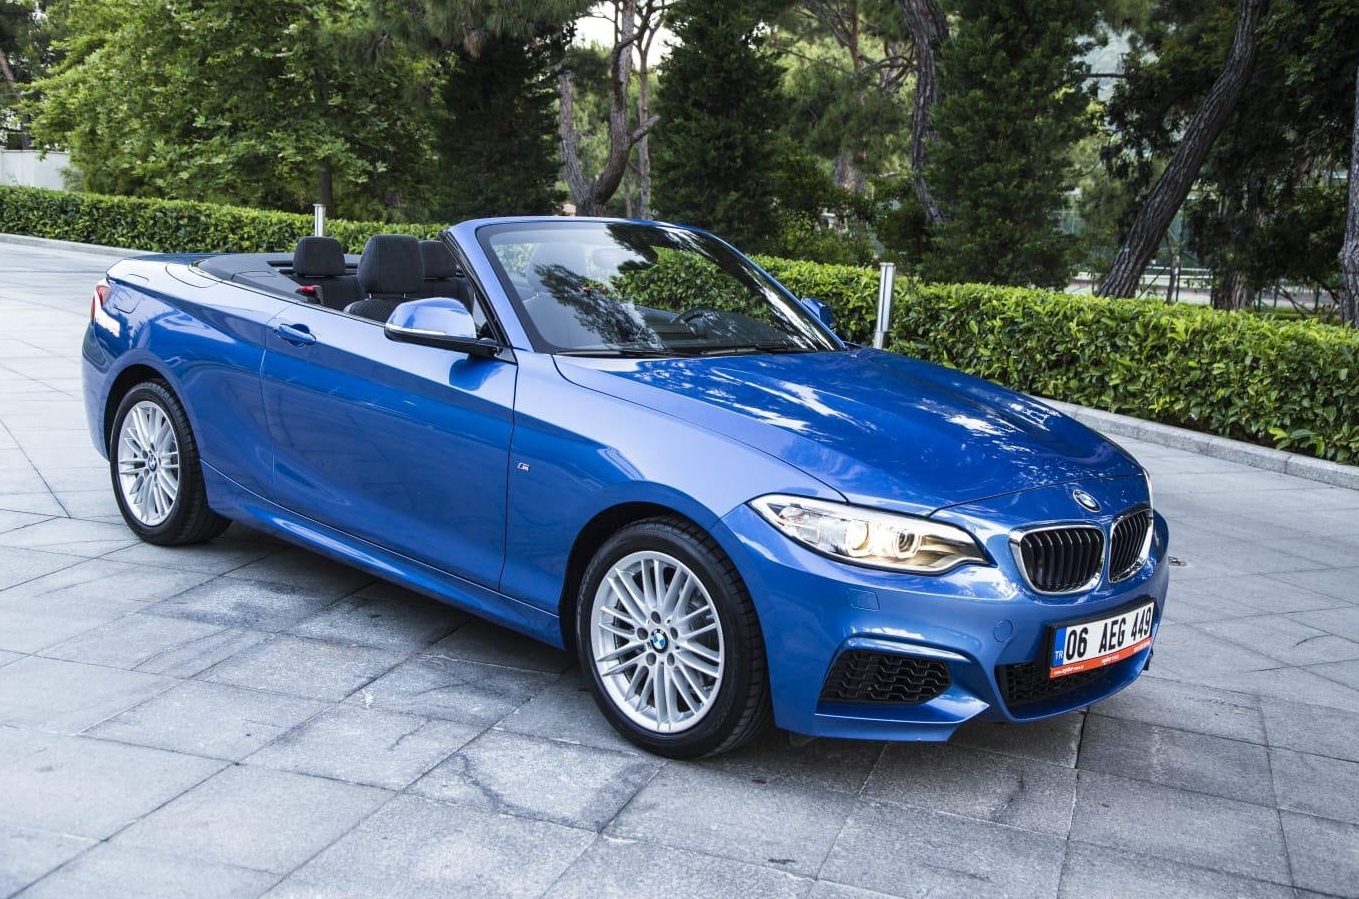 <span style="font-weight: bold;">BMW 218i Cabrio&nbsp;</span>